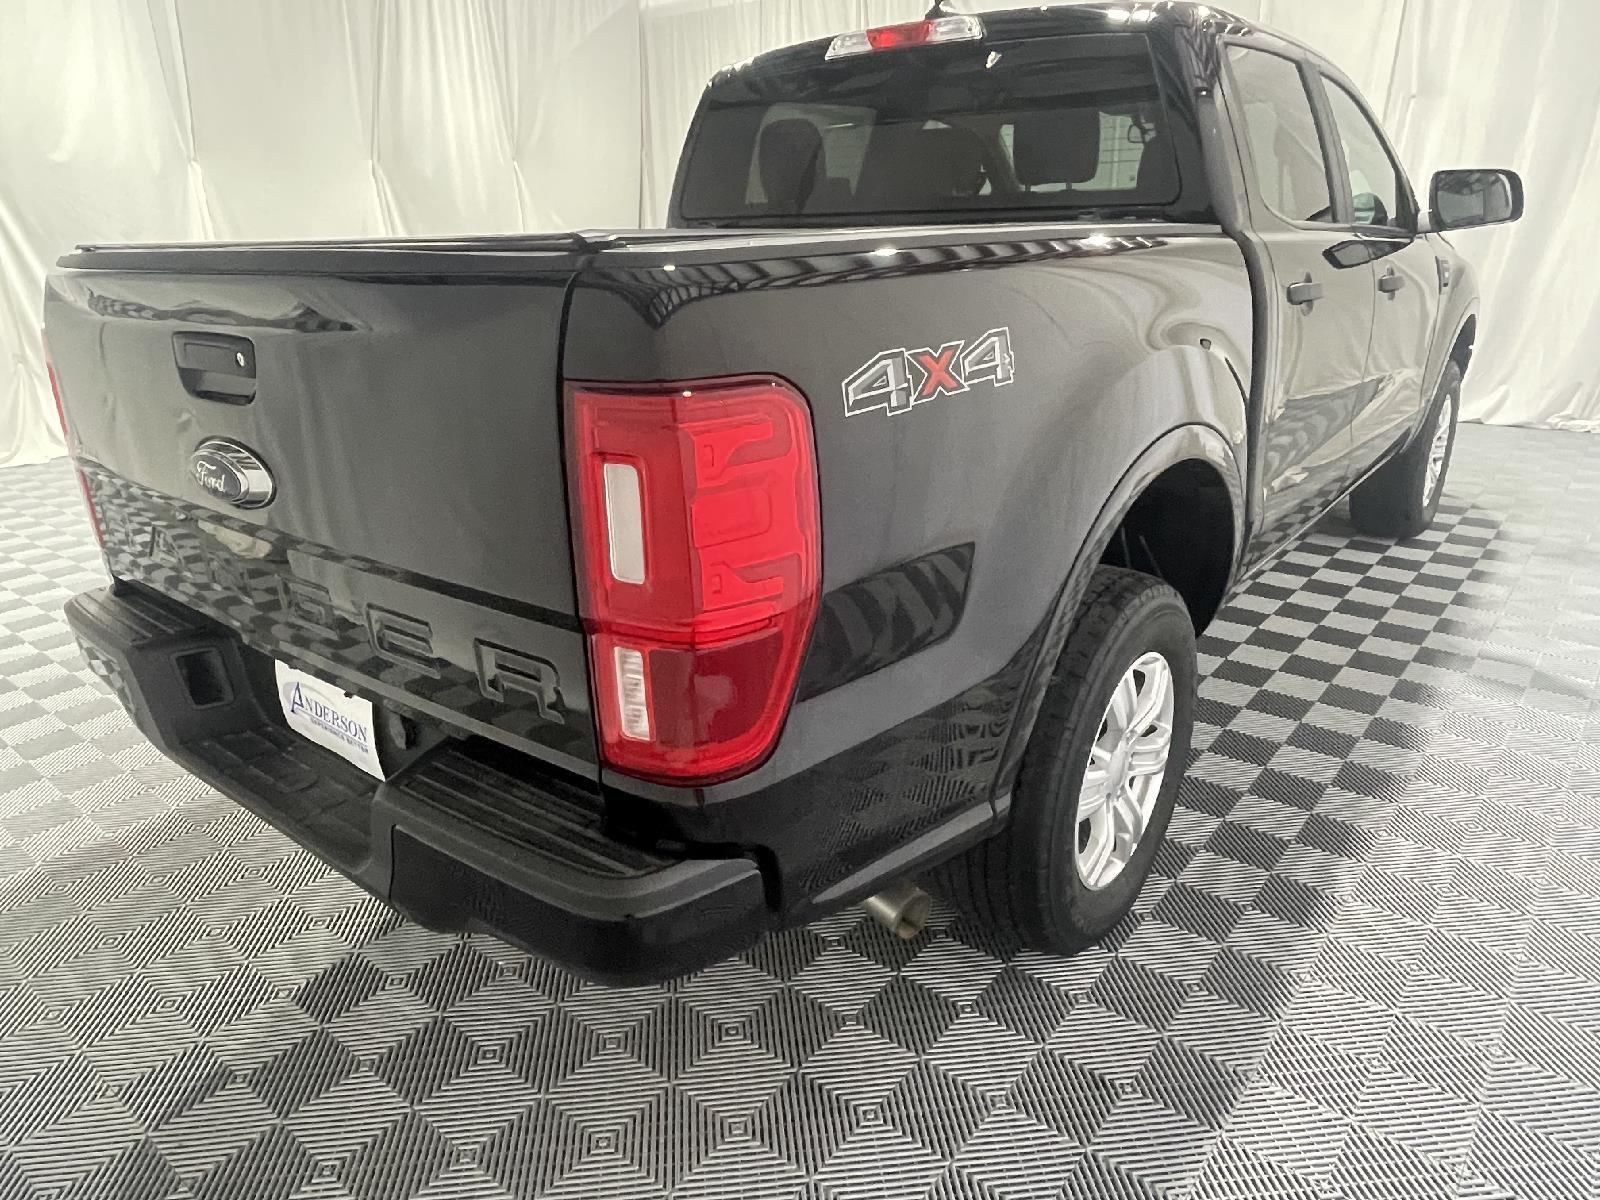 Used 2021 Ford Ranger XLT Crew Cab Truck for sale in St Joseph MO